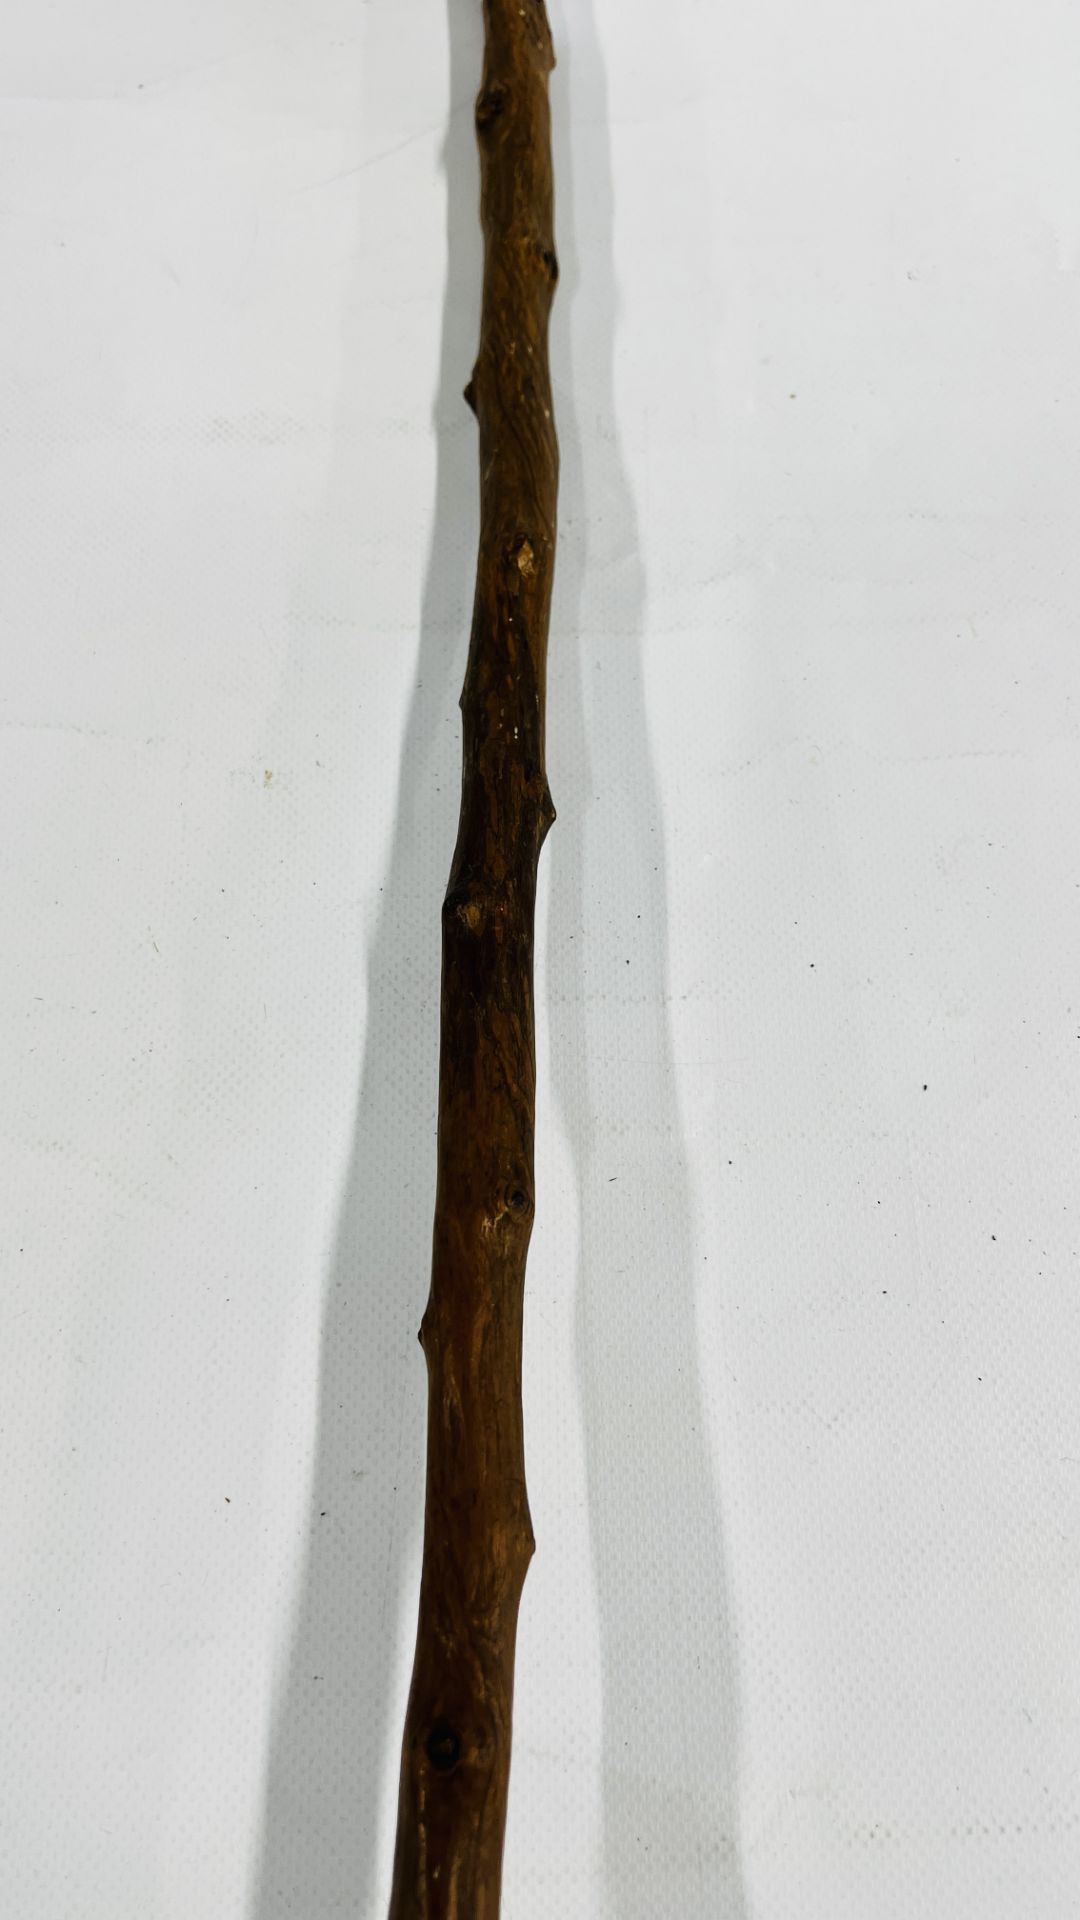 A C19th VINTAGE BRIAR WOOD WALKING STICK THE HANDLE CARVED WITH A GENTLEMAN'S FACE, L 89CM. - Image 5 of 7